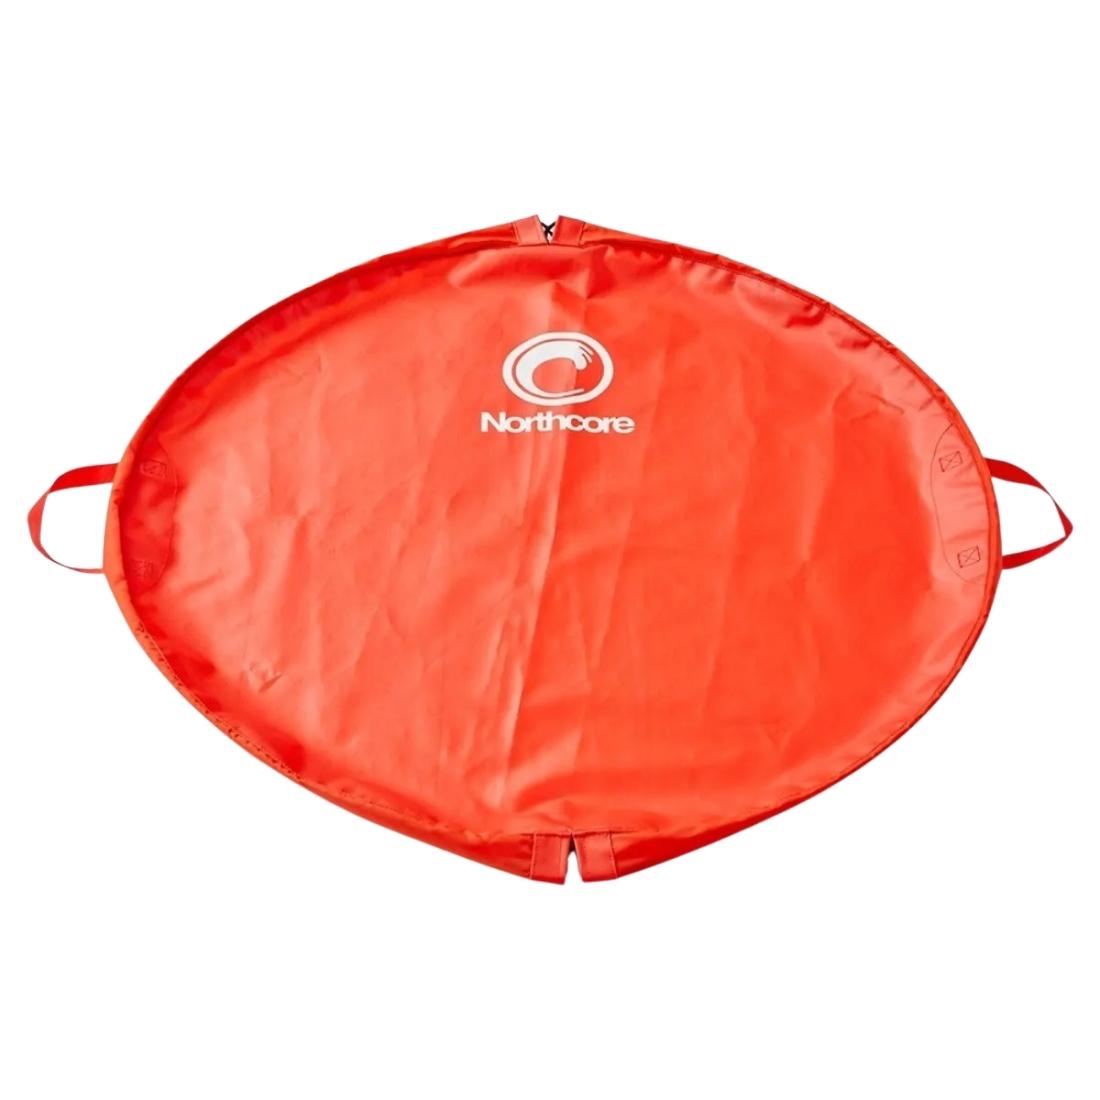 Northcore Waterproof Changing Mat - Red - Wetsuit Change Mat by Northcore One Size